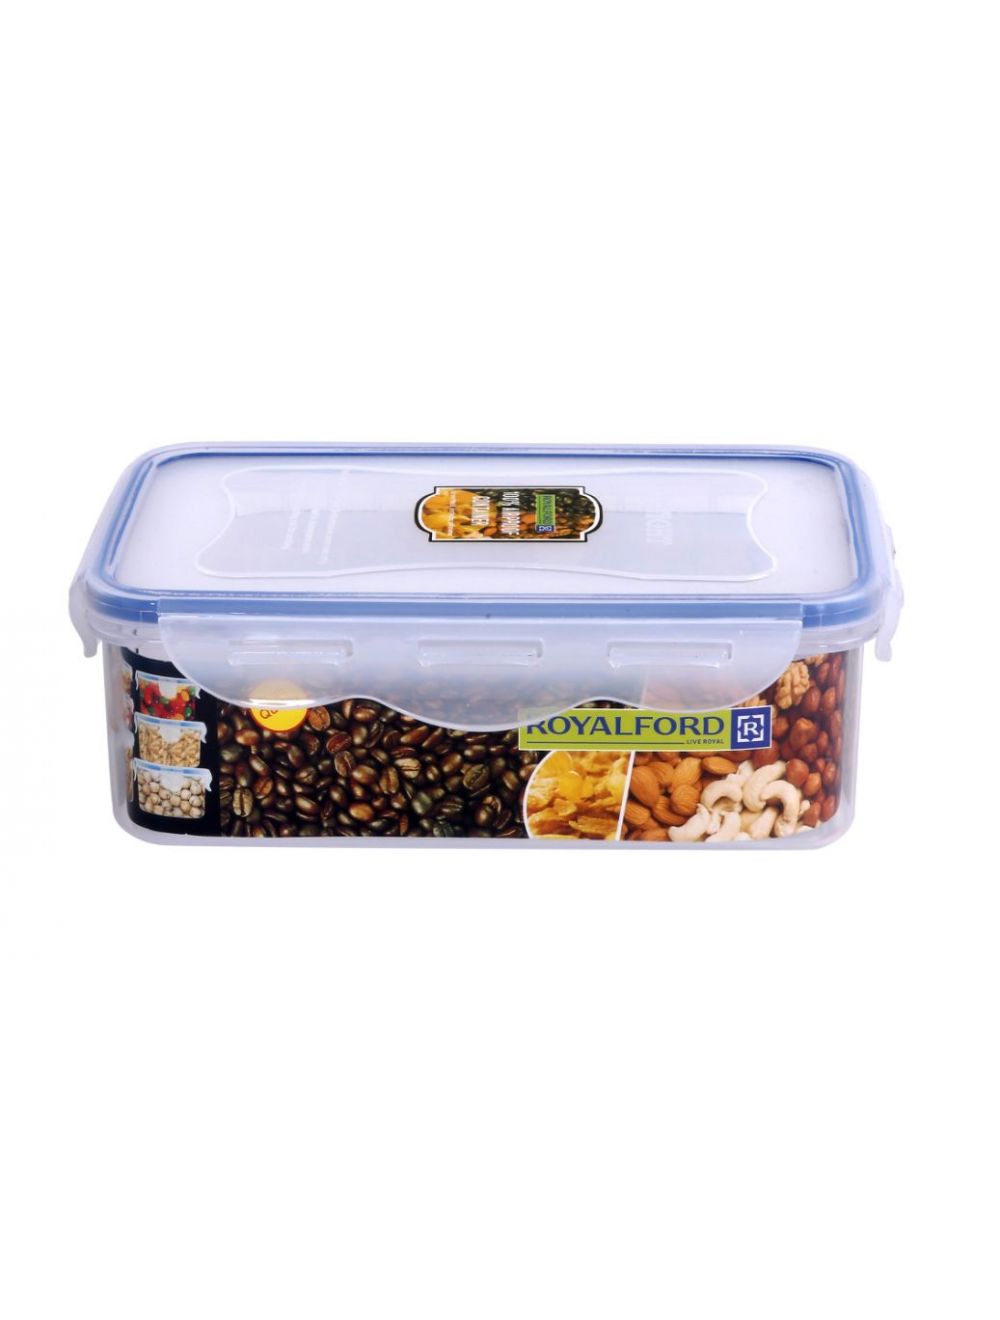 Royalford RF415APB 350 mL Meal Prep Container